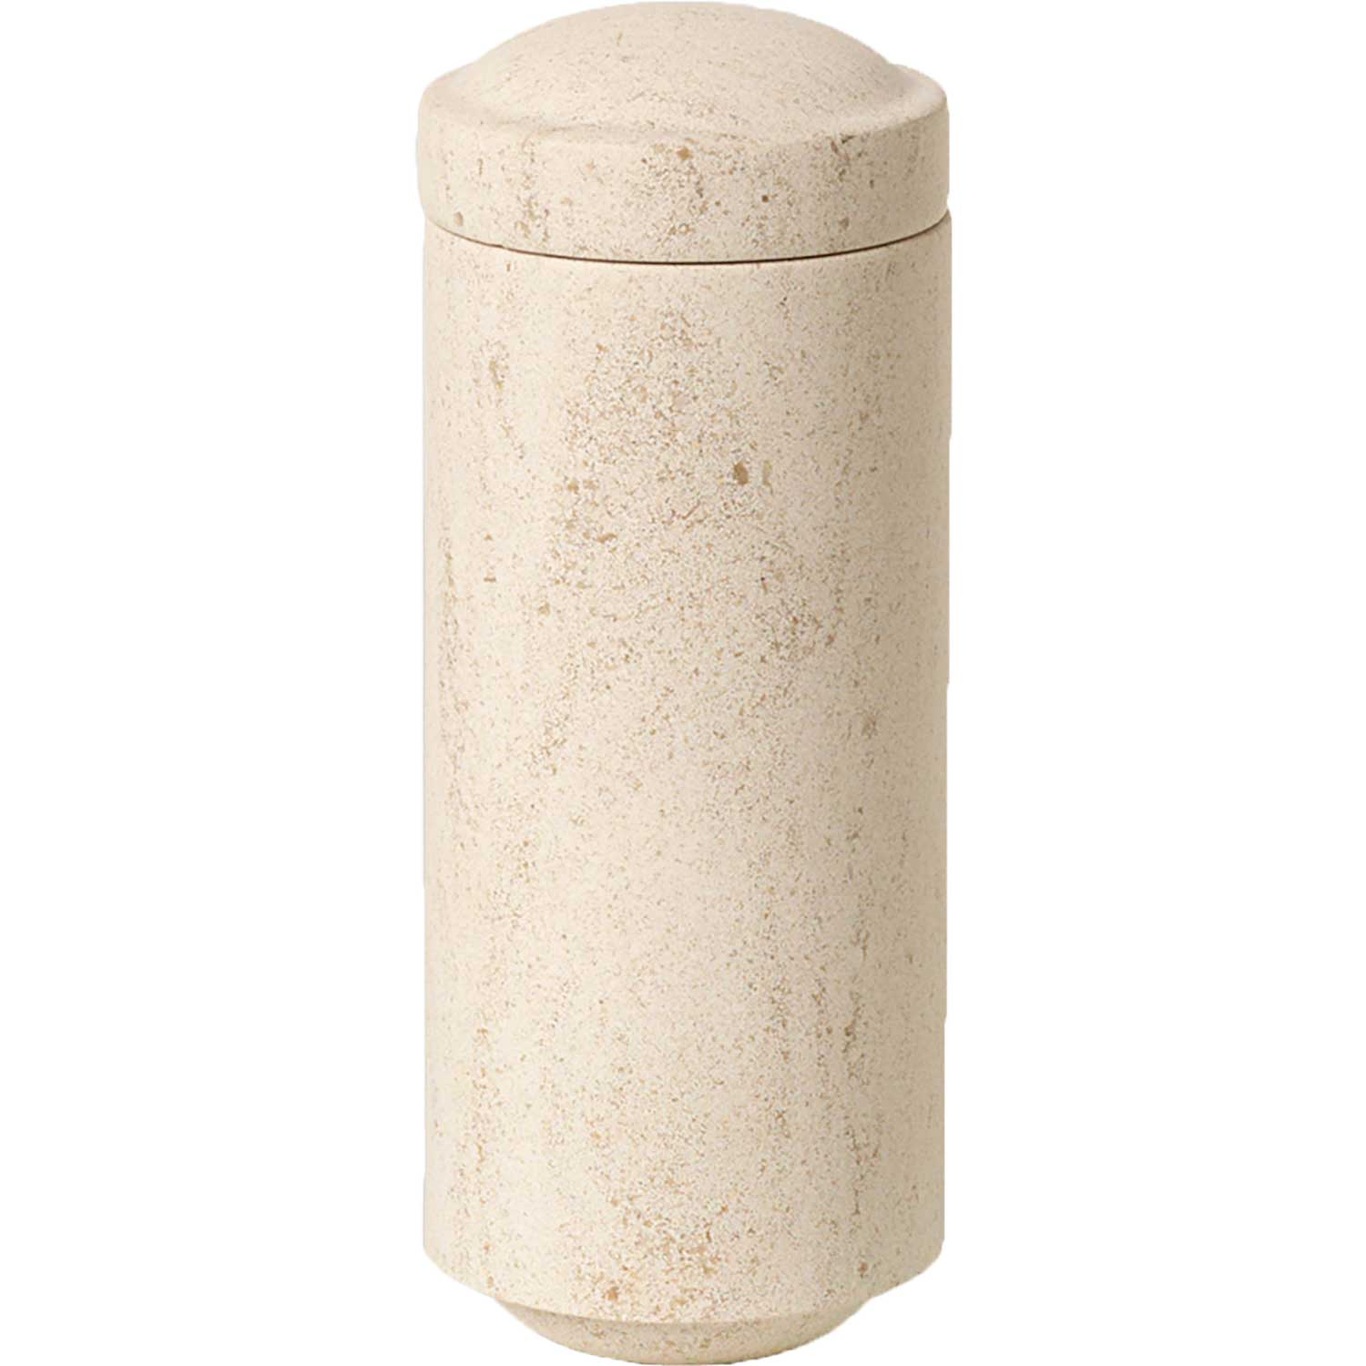 Gallery Objects Purkki 18 cm, Lime Stone